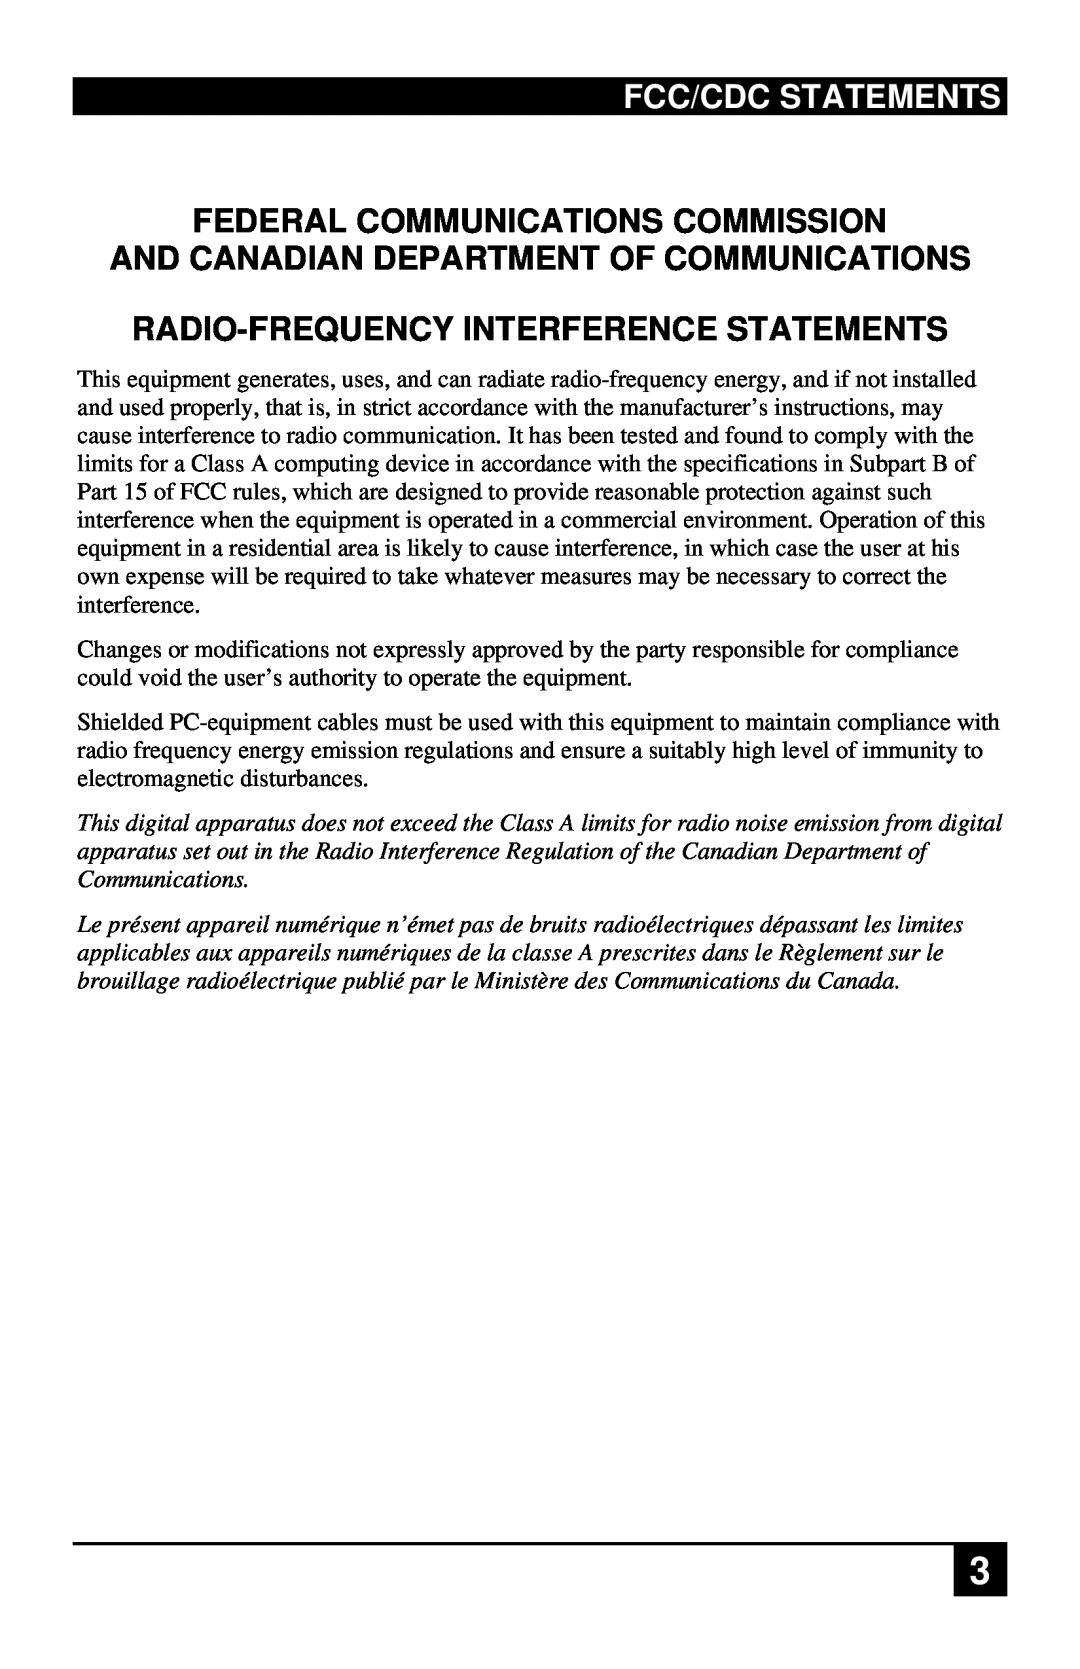 Black Box ACU4001A manual Fcc/Cdc Statements, Federal Communications Commission, And Canadian Department Of Communications 